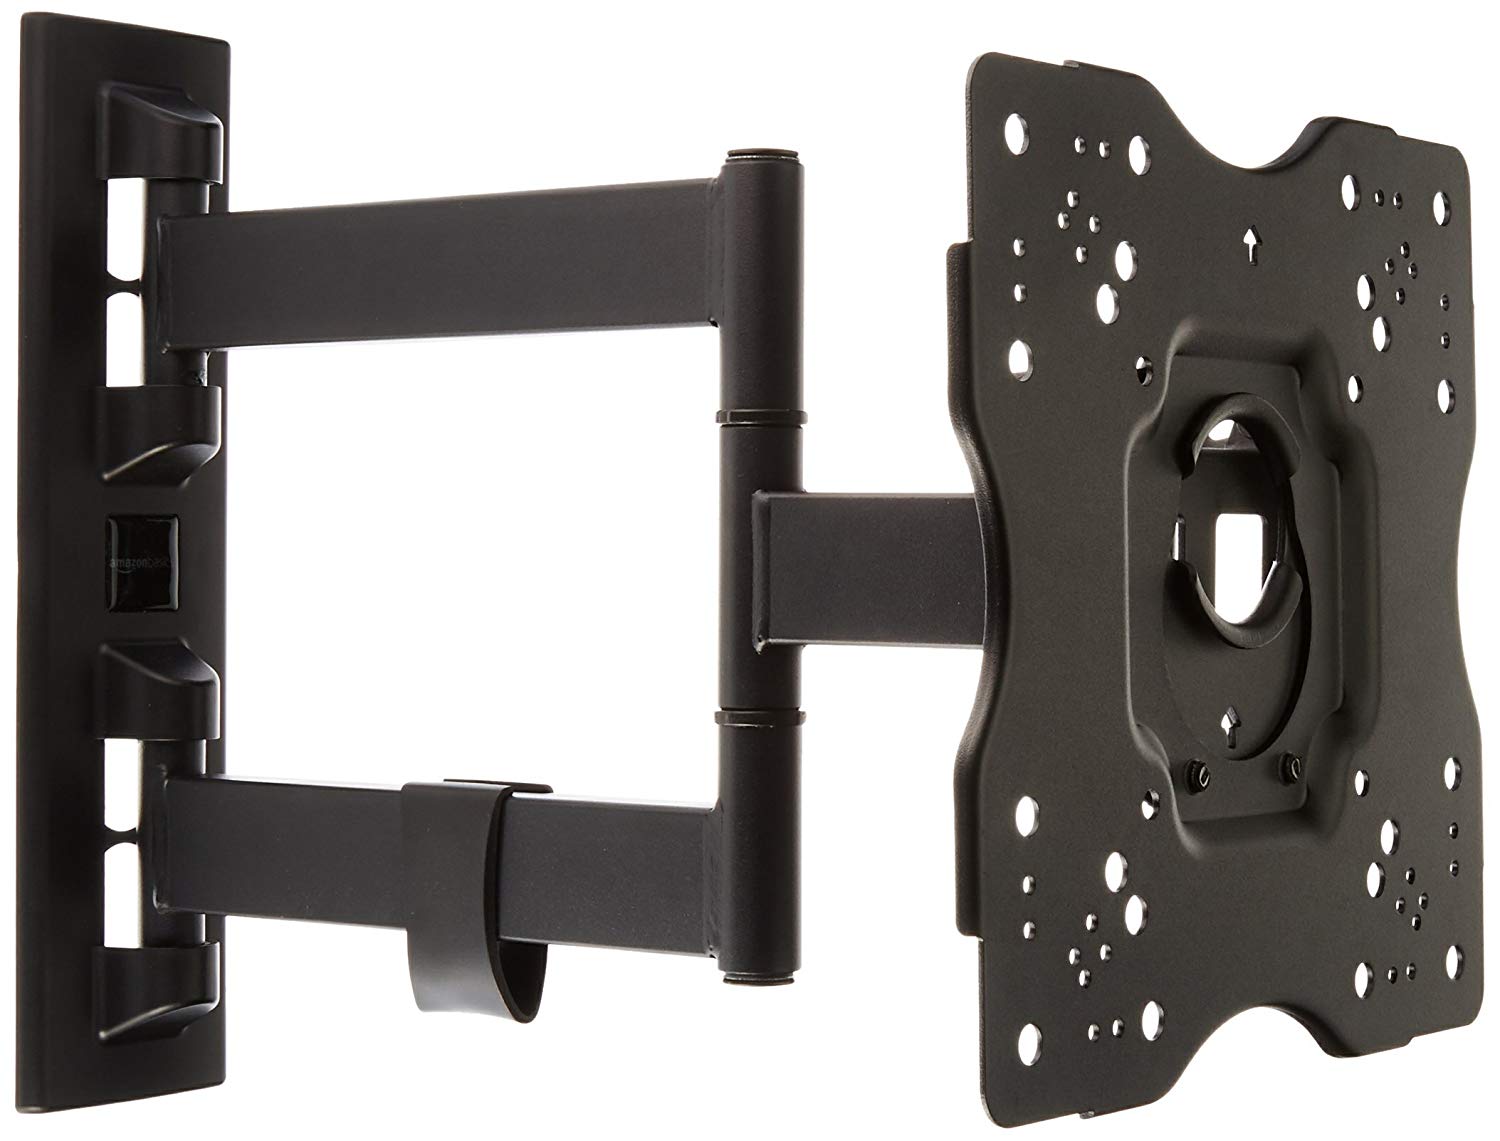 Fireplace Doors Amazon New Amazonbasics Heavy Duty Full Motion Articulating Tv Wall Mount for 22 Inch to 55 Inch Led Lcd Flat Screen Tvs